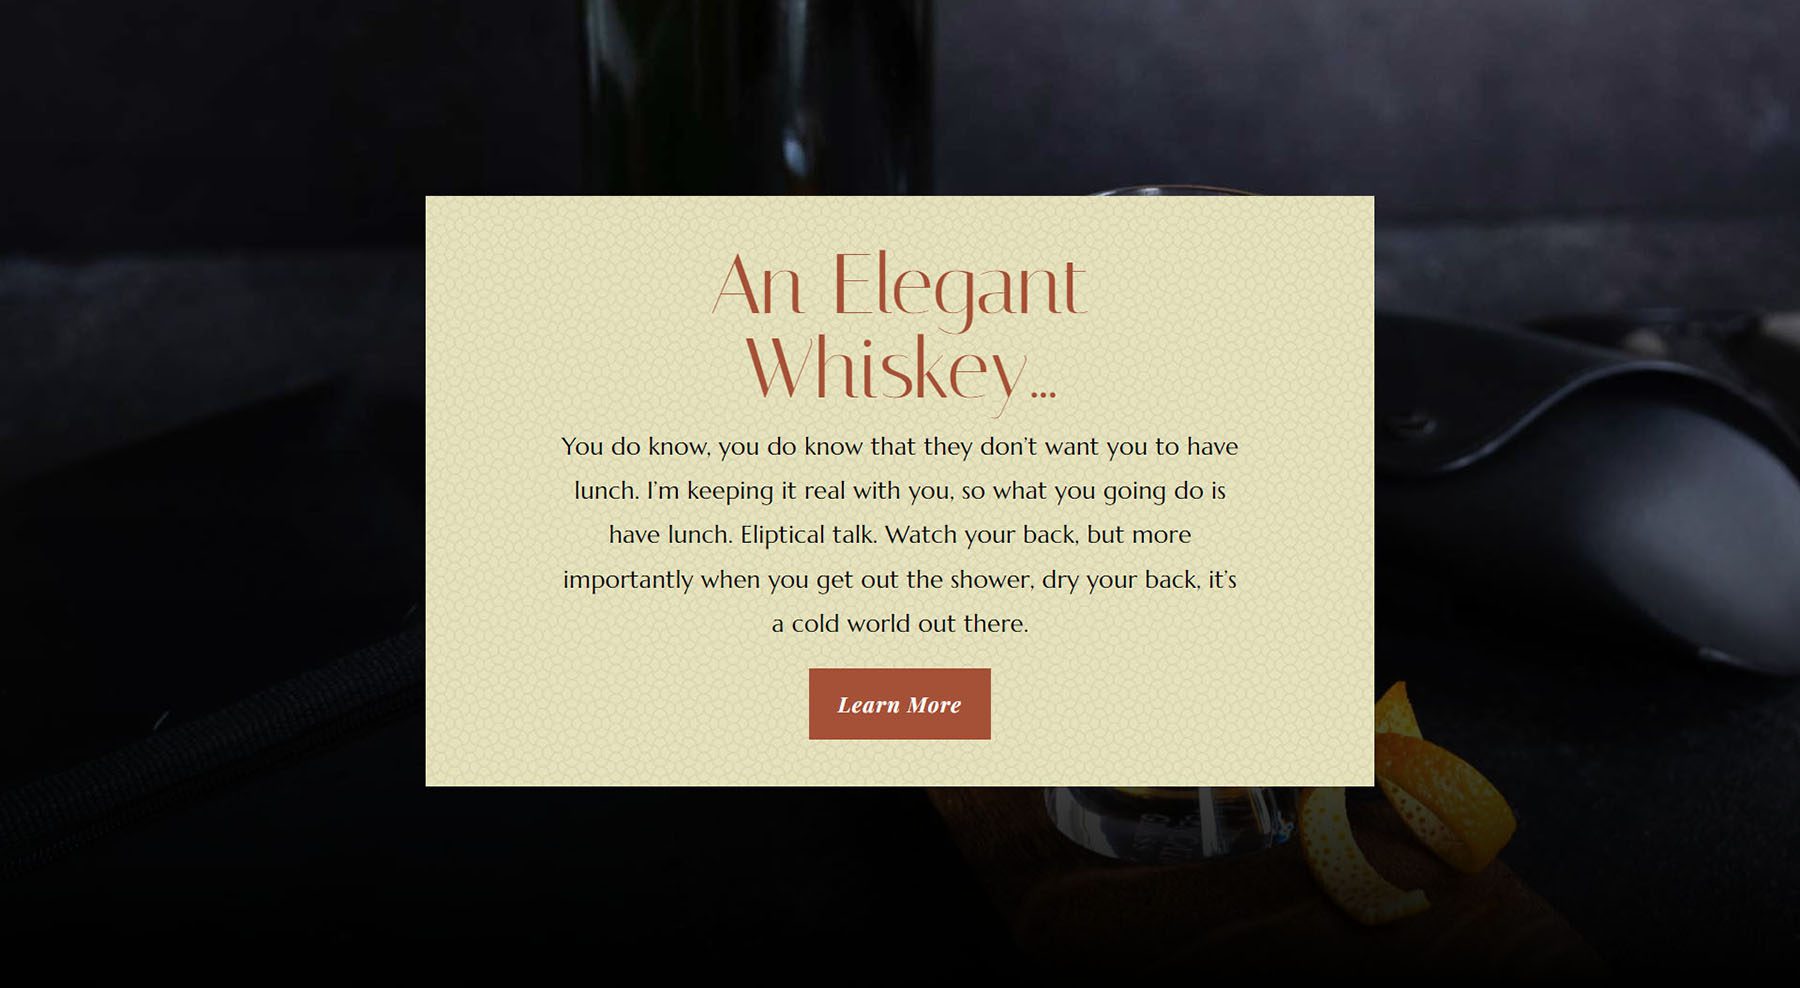 Divi Whiskey Inspired Call to Action Design